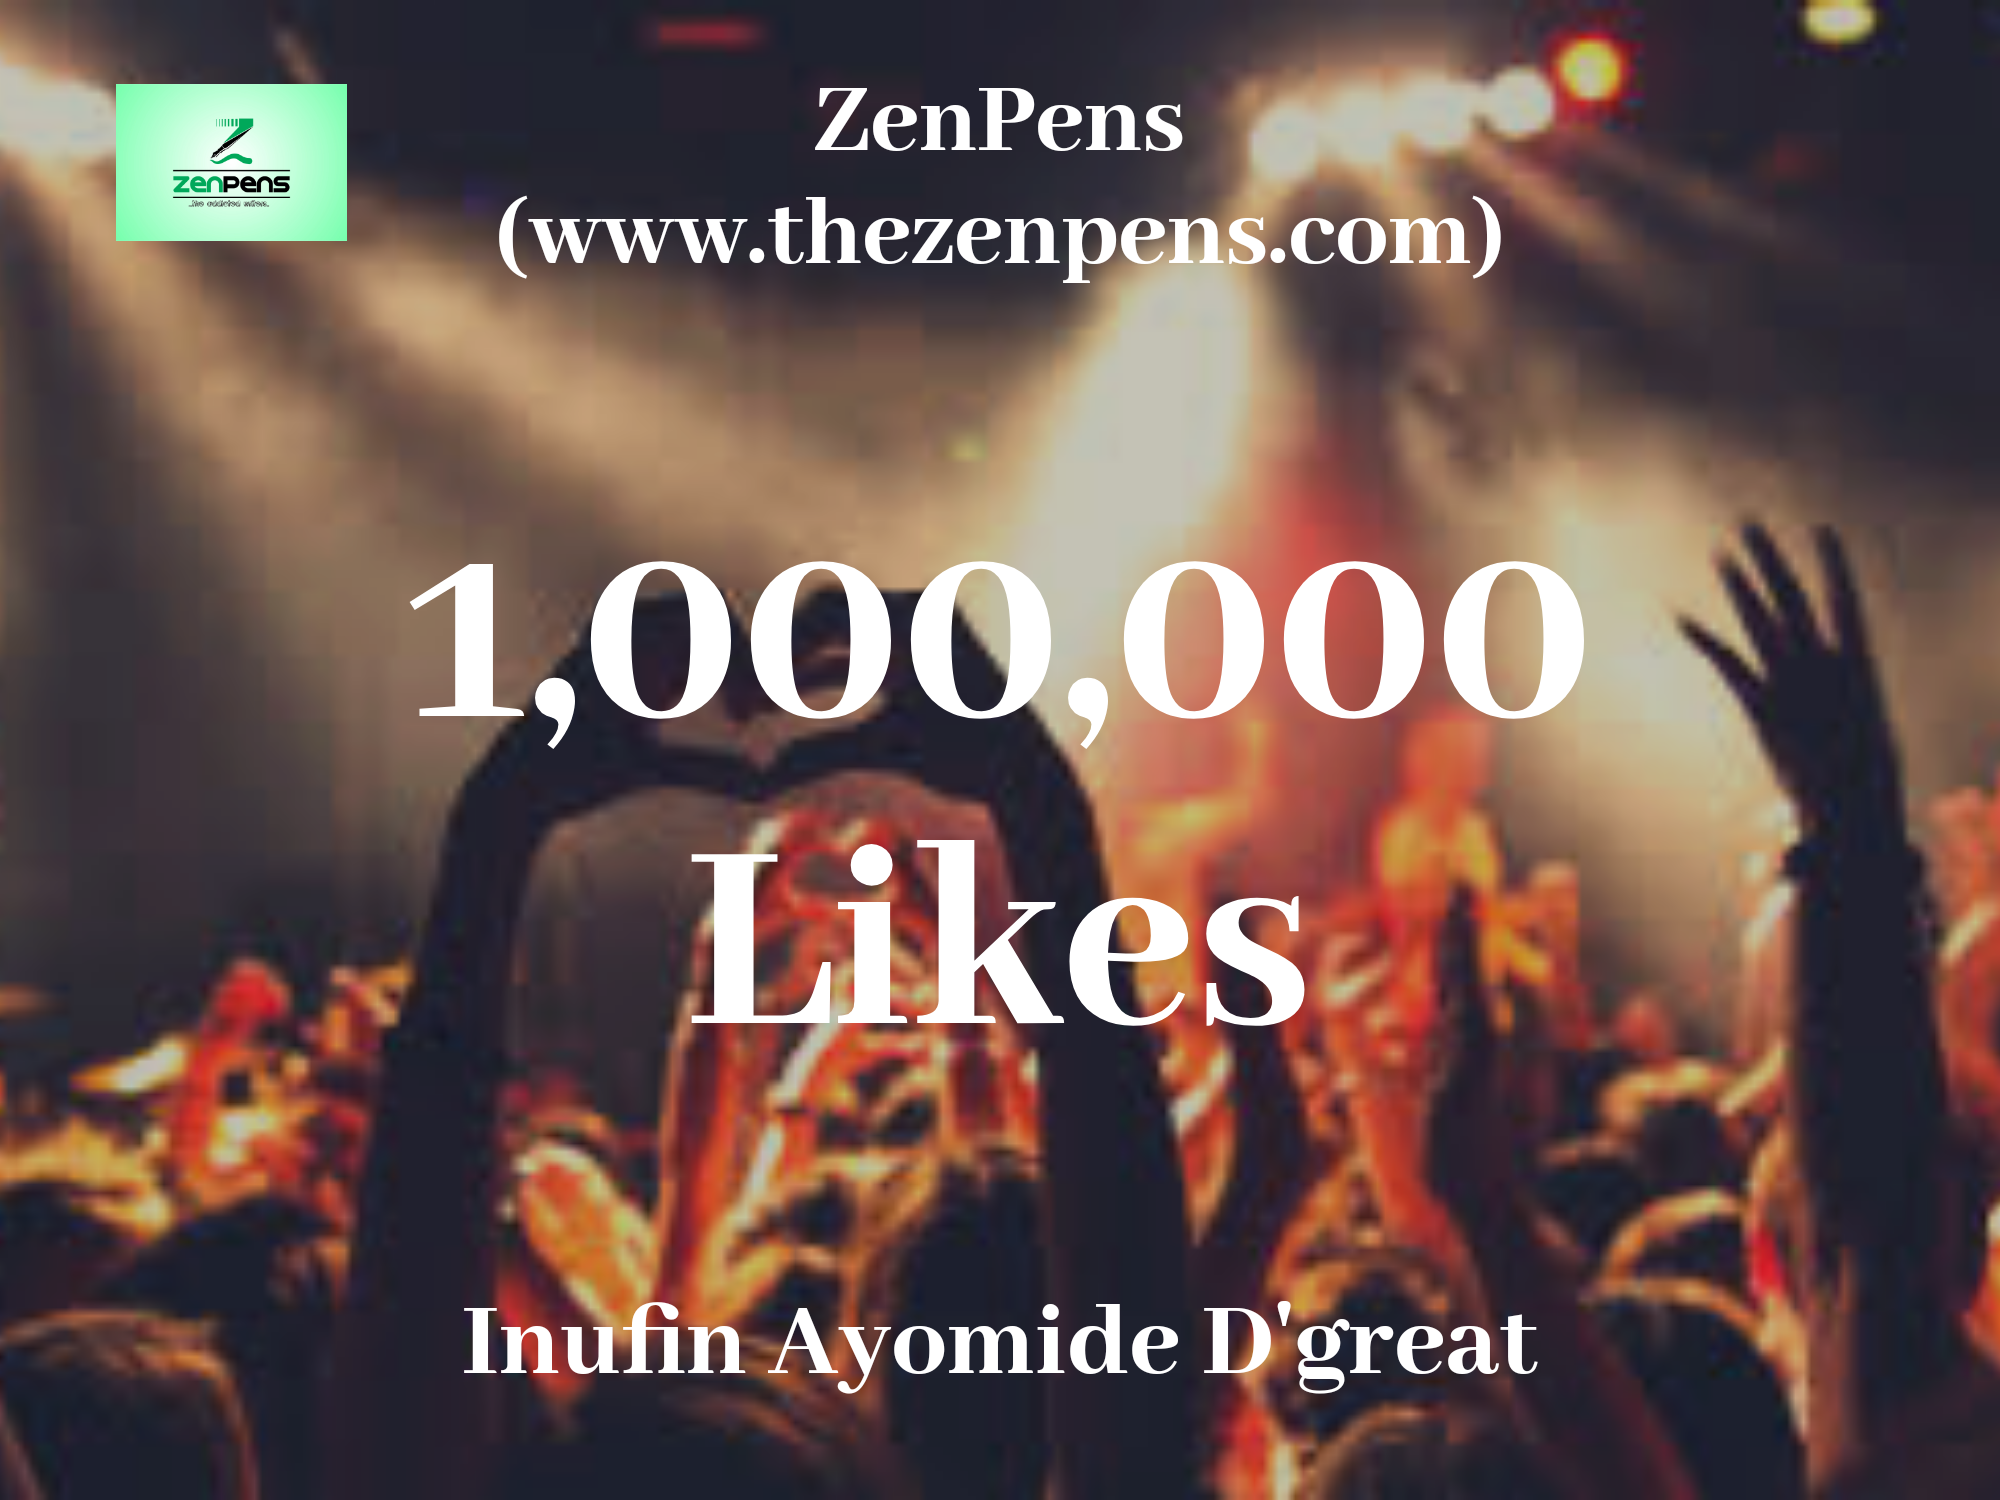 Photo of “1,000,000 Likes” — A Poem by Ayomide Inufin D’great